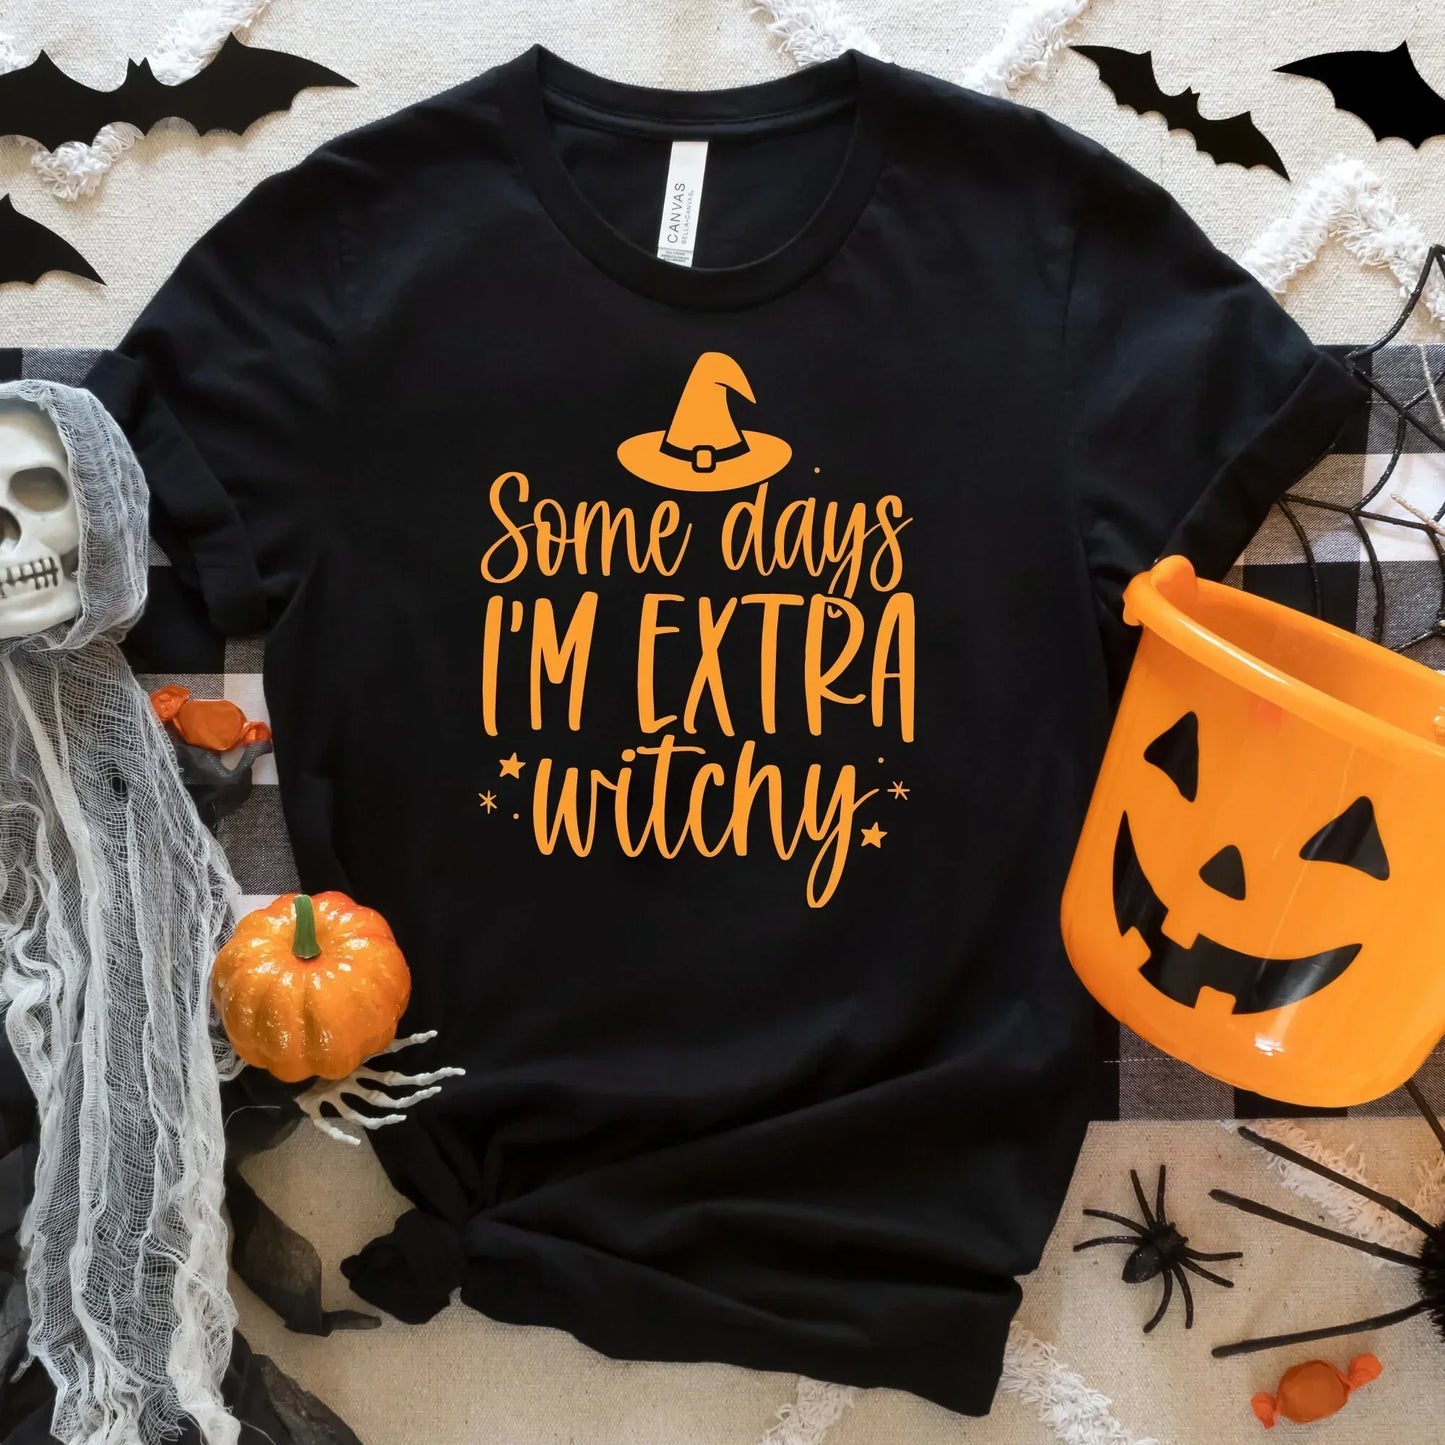 Halloween Sweatshirt, Extra Witchy woman, Witch Shirt, Halloween Crewneck, Funny Halloween Party, Cute Halloween Hoodie, Halloween Cat Shirt